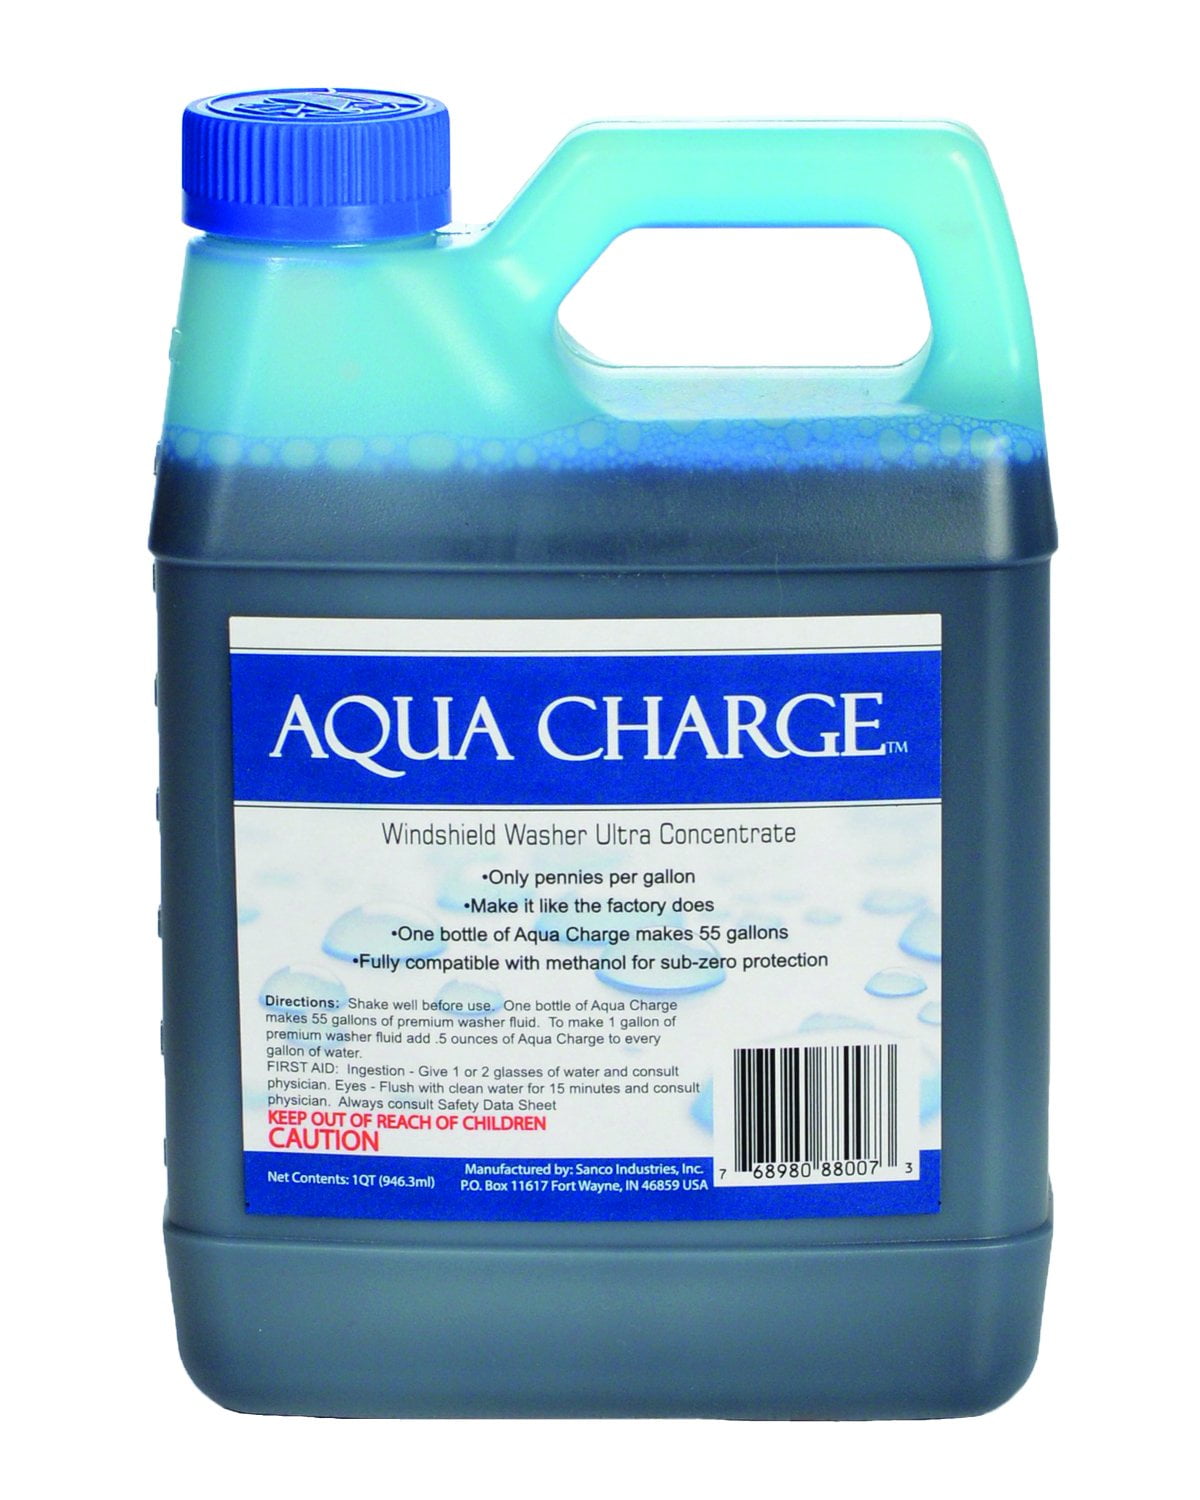 Aqua Charge Windshield Washer Ultra Concentrate, 1 quart makes